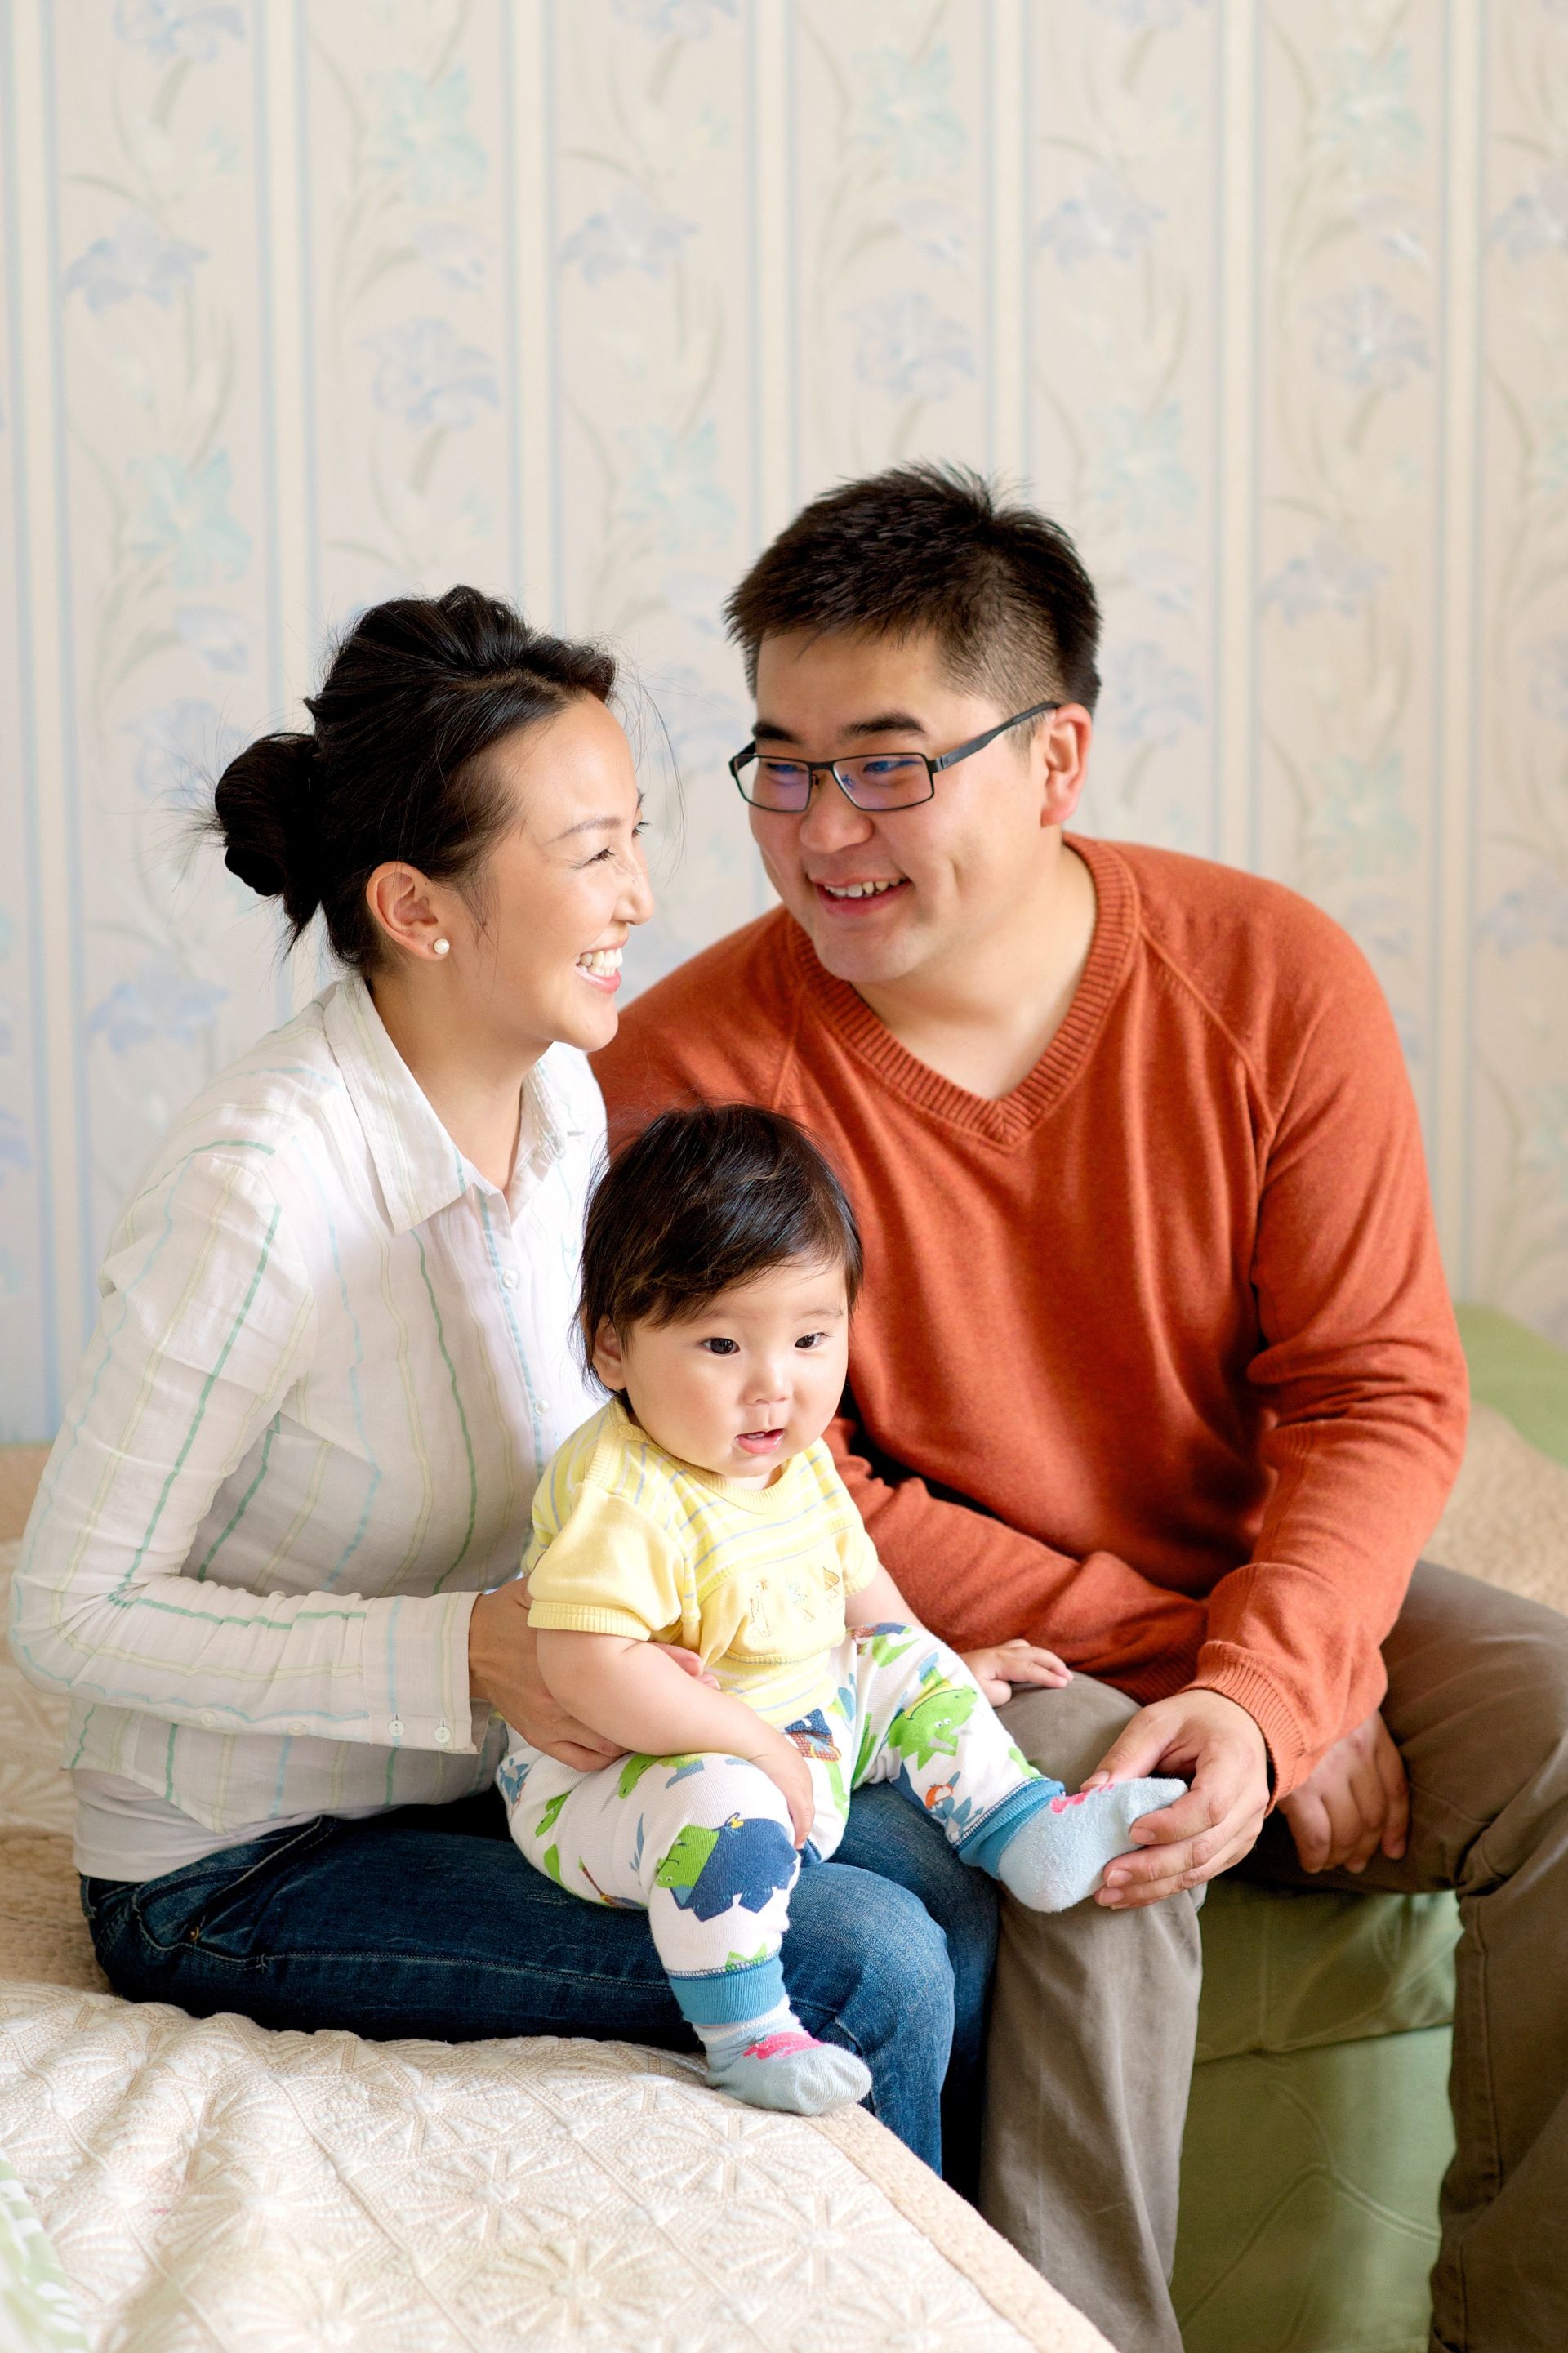 A husband and wife sit close together with their baby daughter.